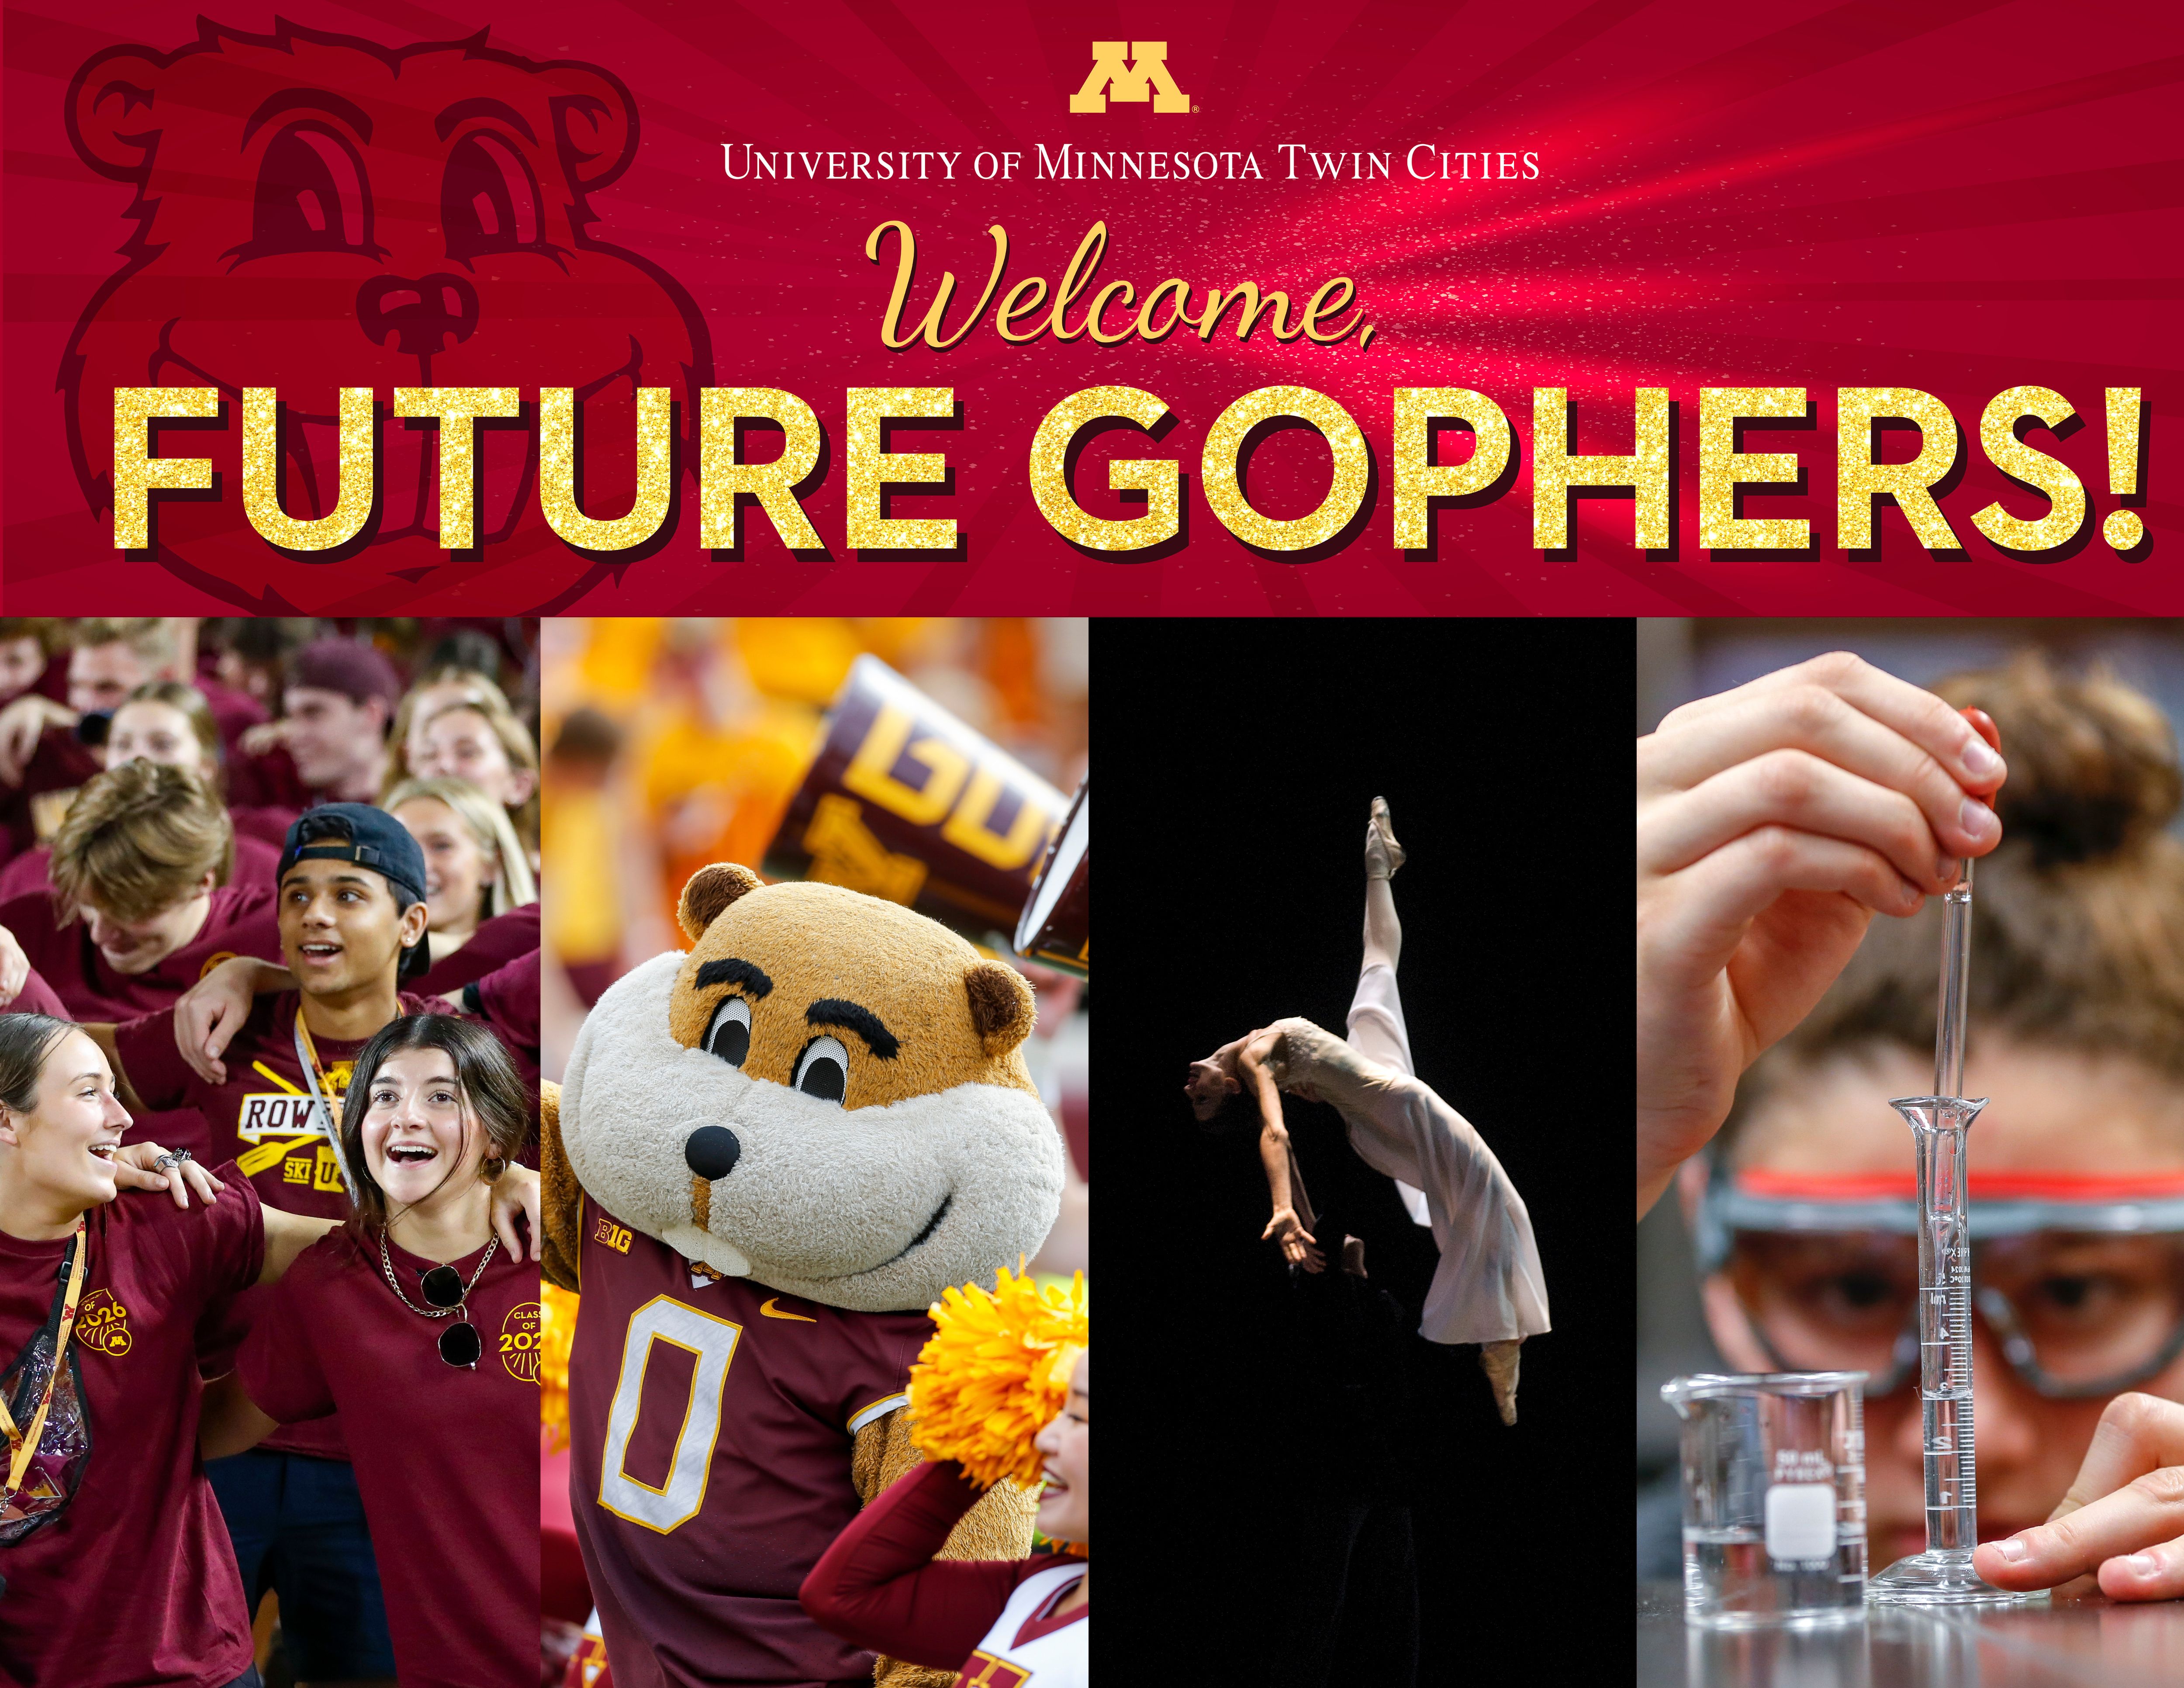 University of Minnesota welcomes Future Gophers, with photos of Goldy Gopher and students participating in a sporting event, an artistic dance pose, and science labs.